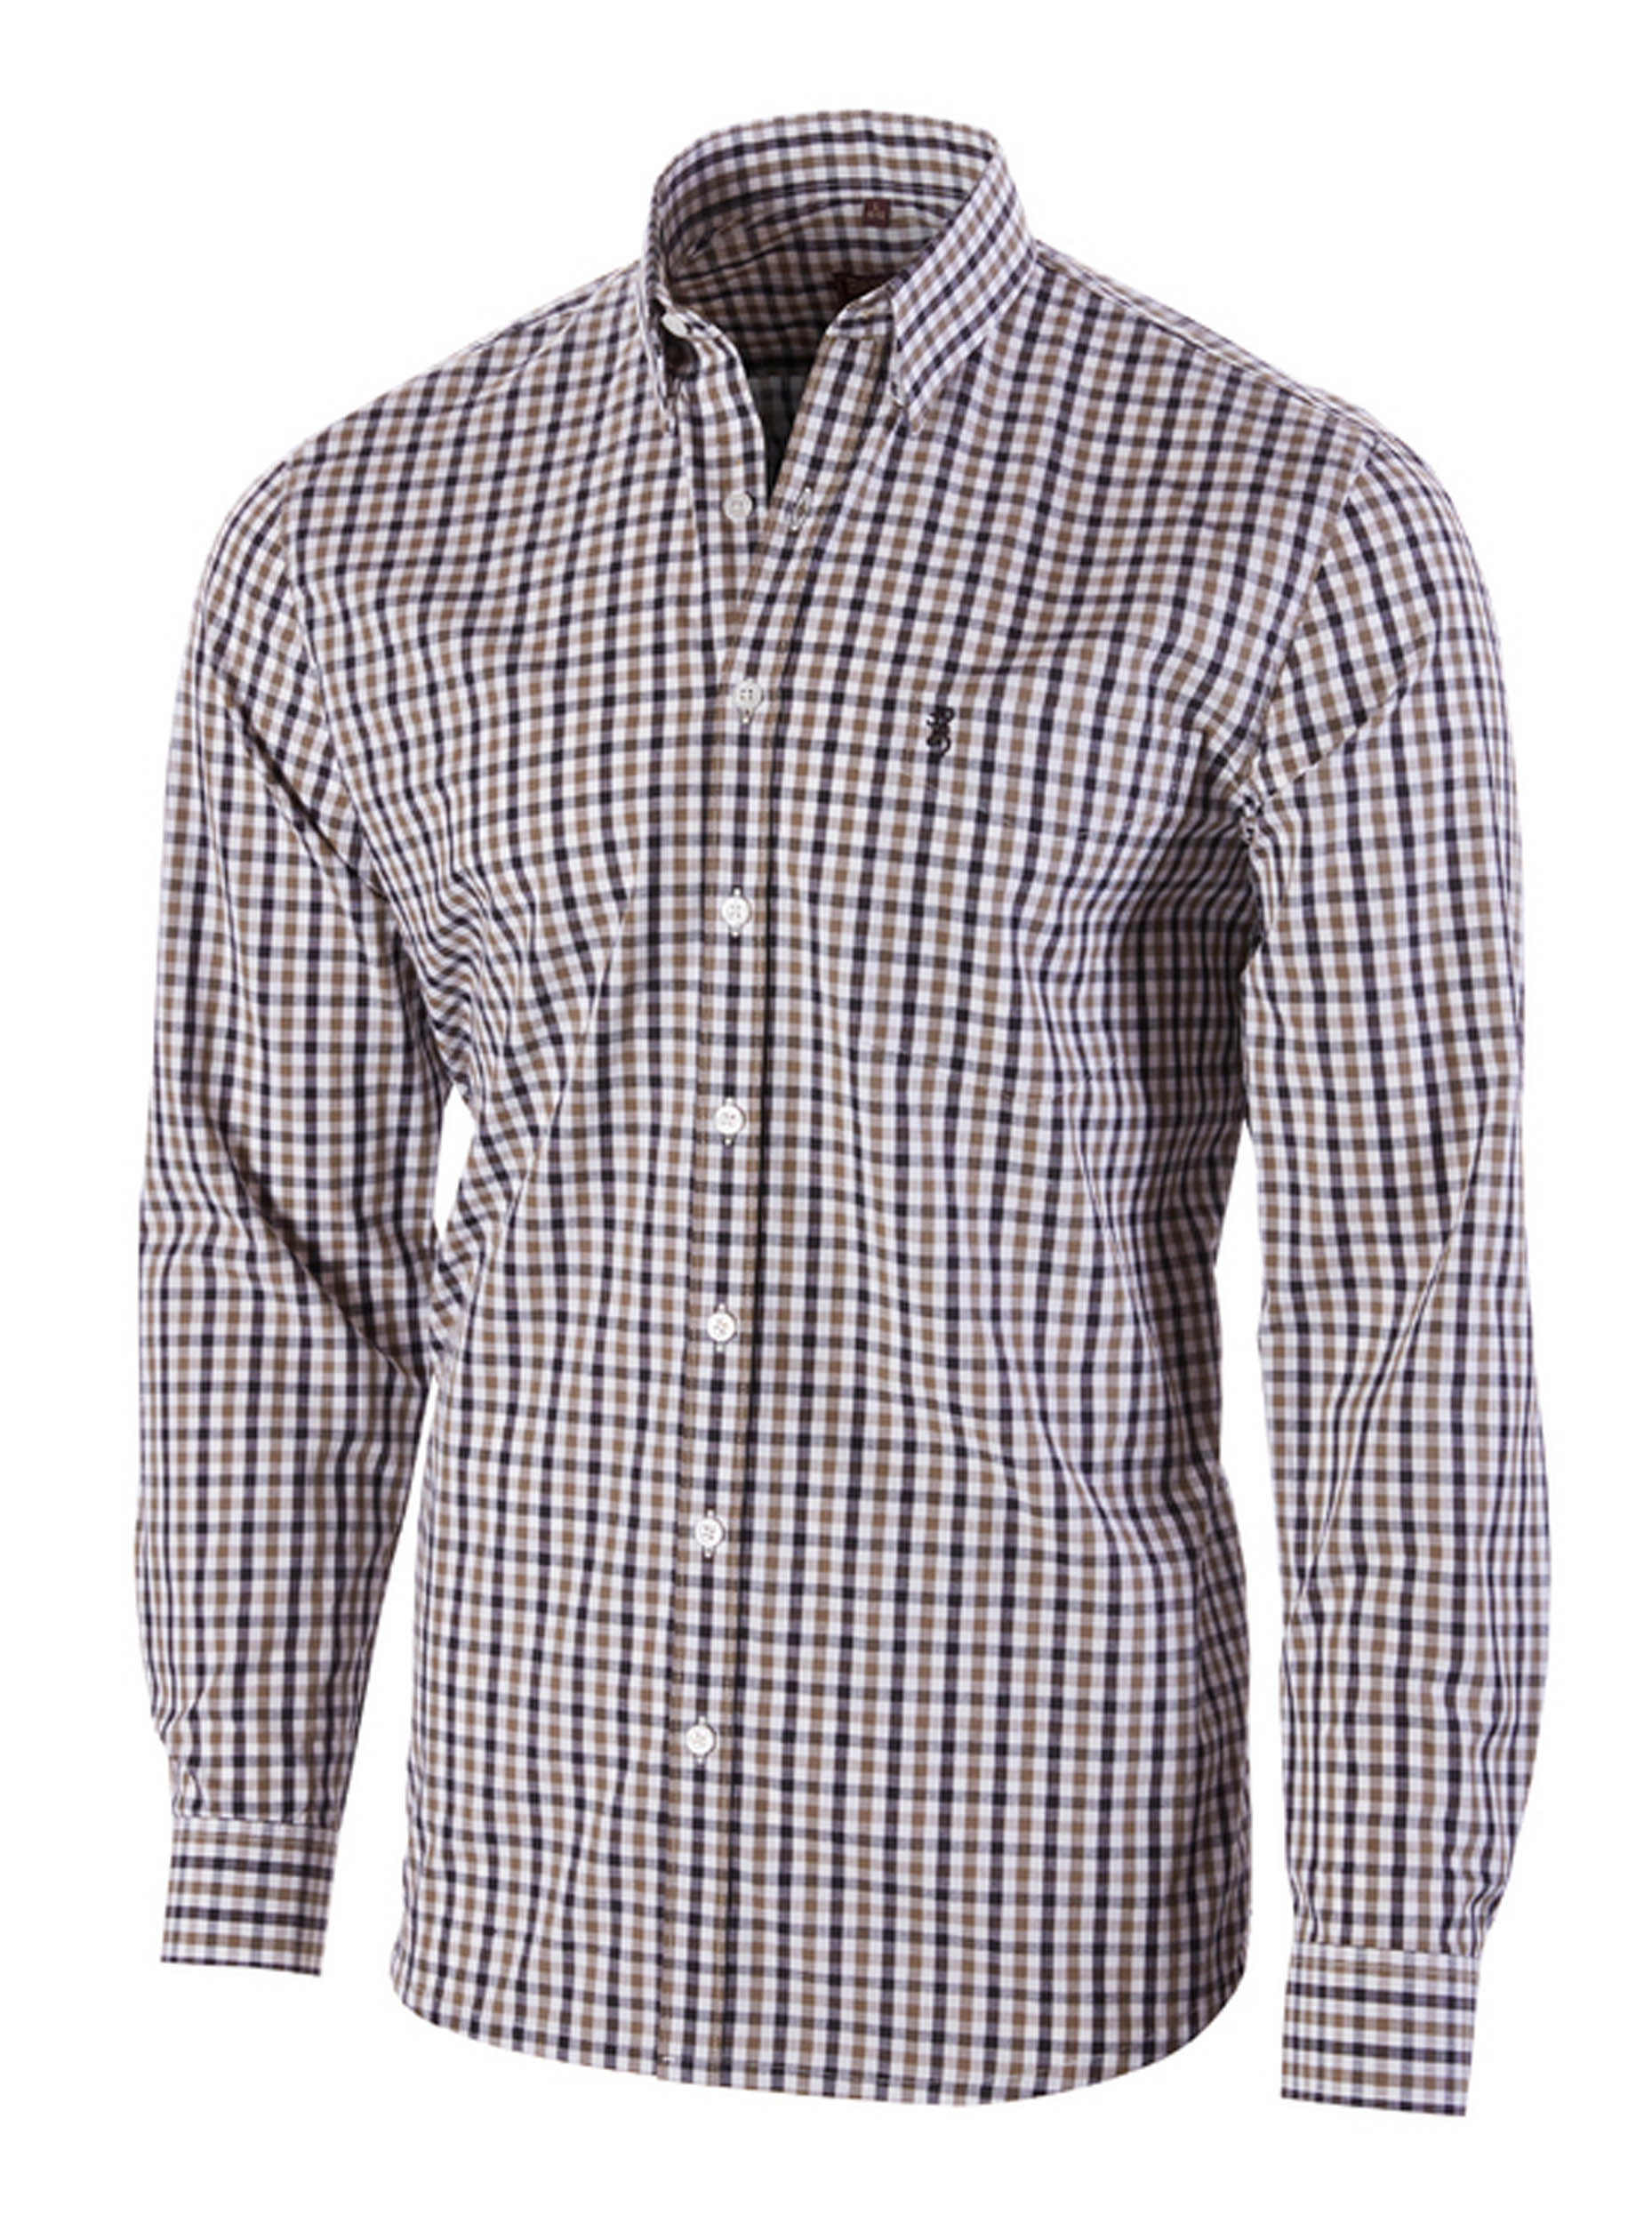 CHEMISE SEAN BRUNE - TAILLE 3XL - Browning